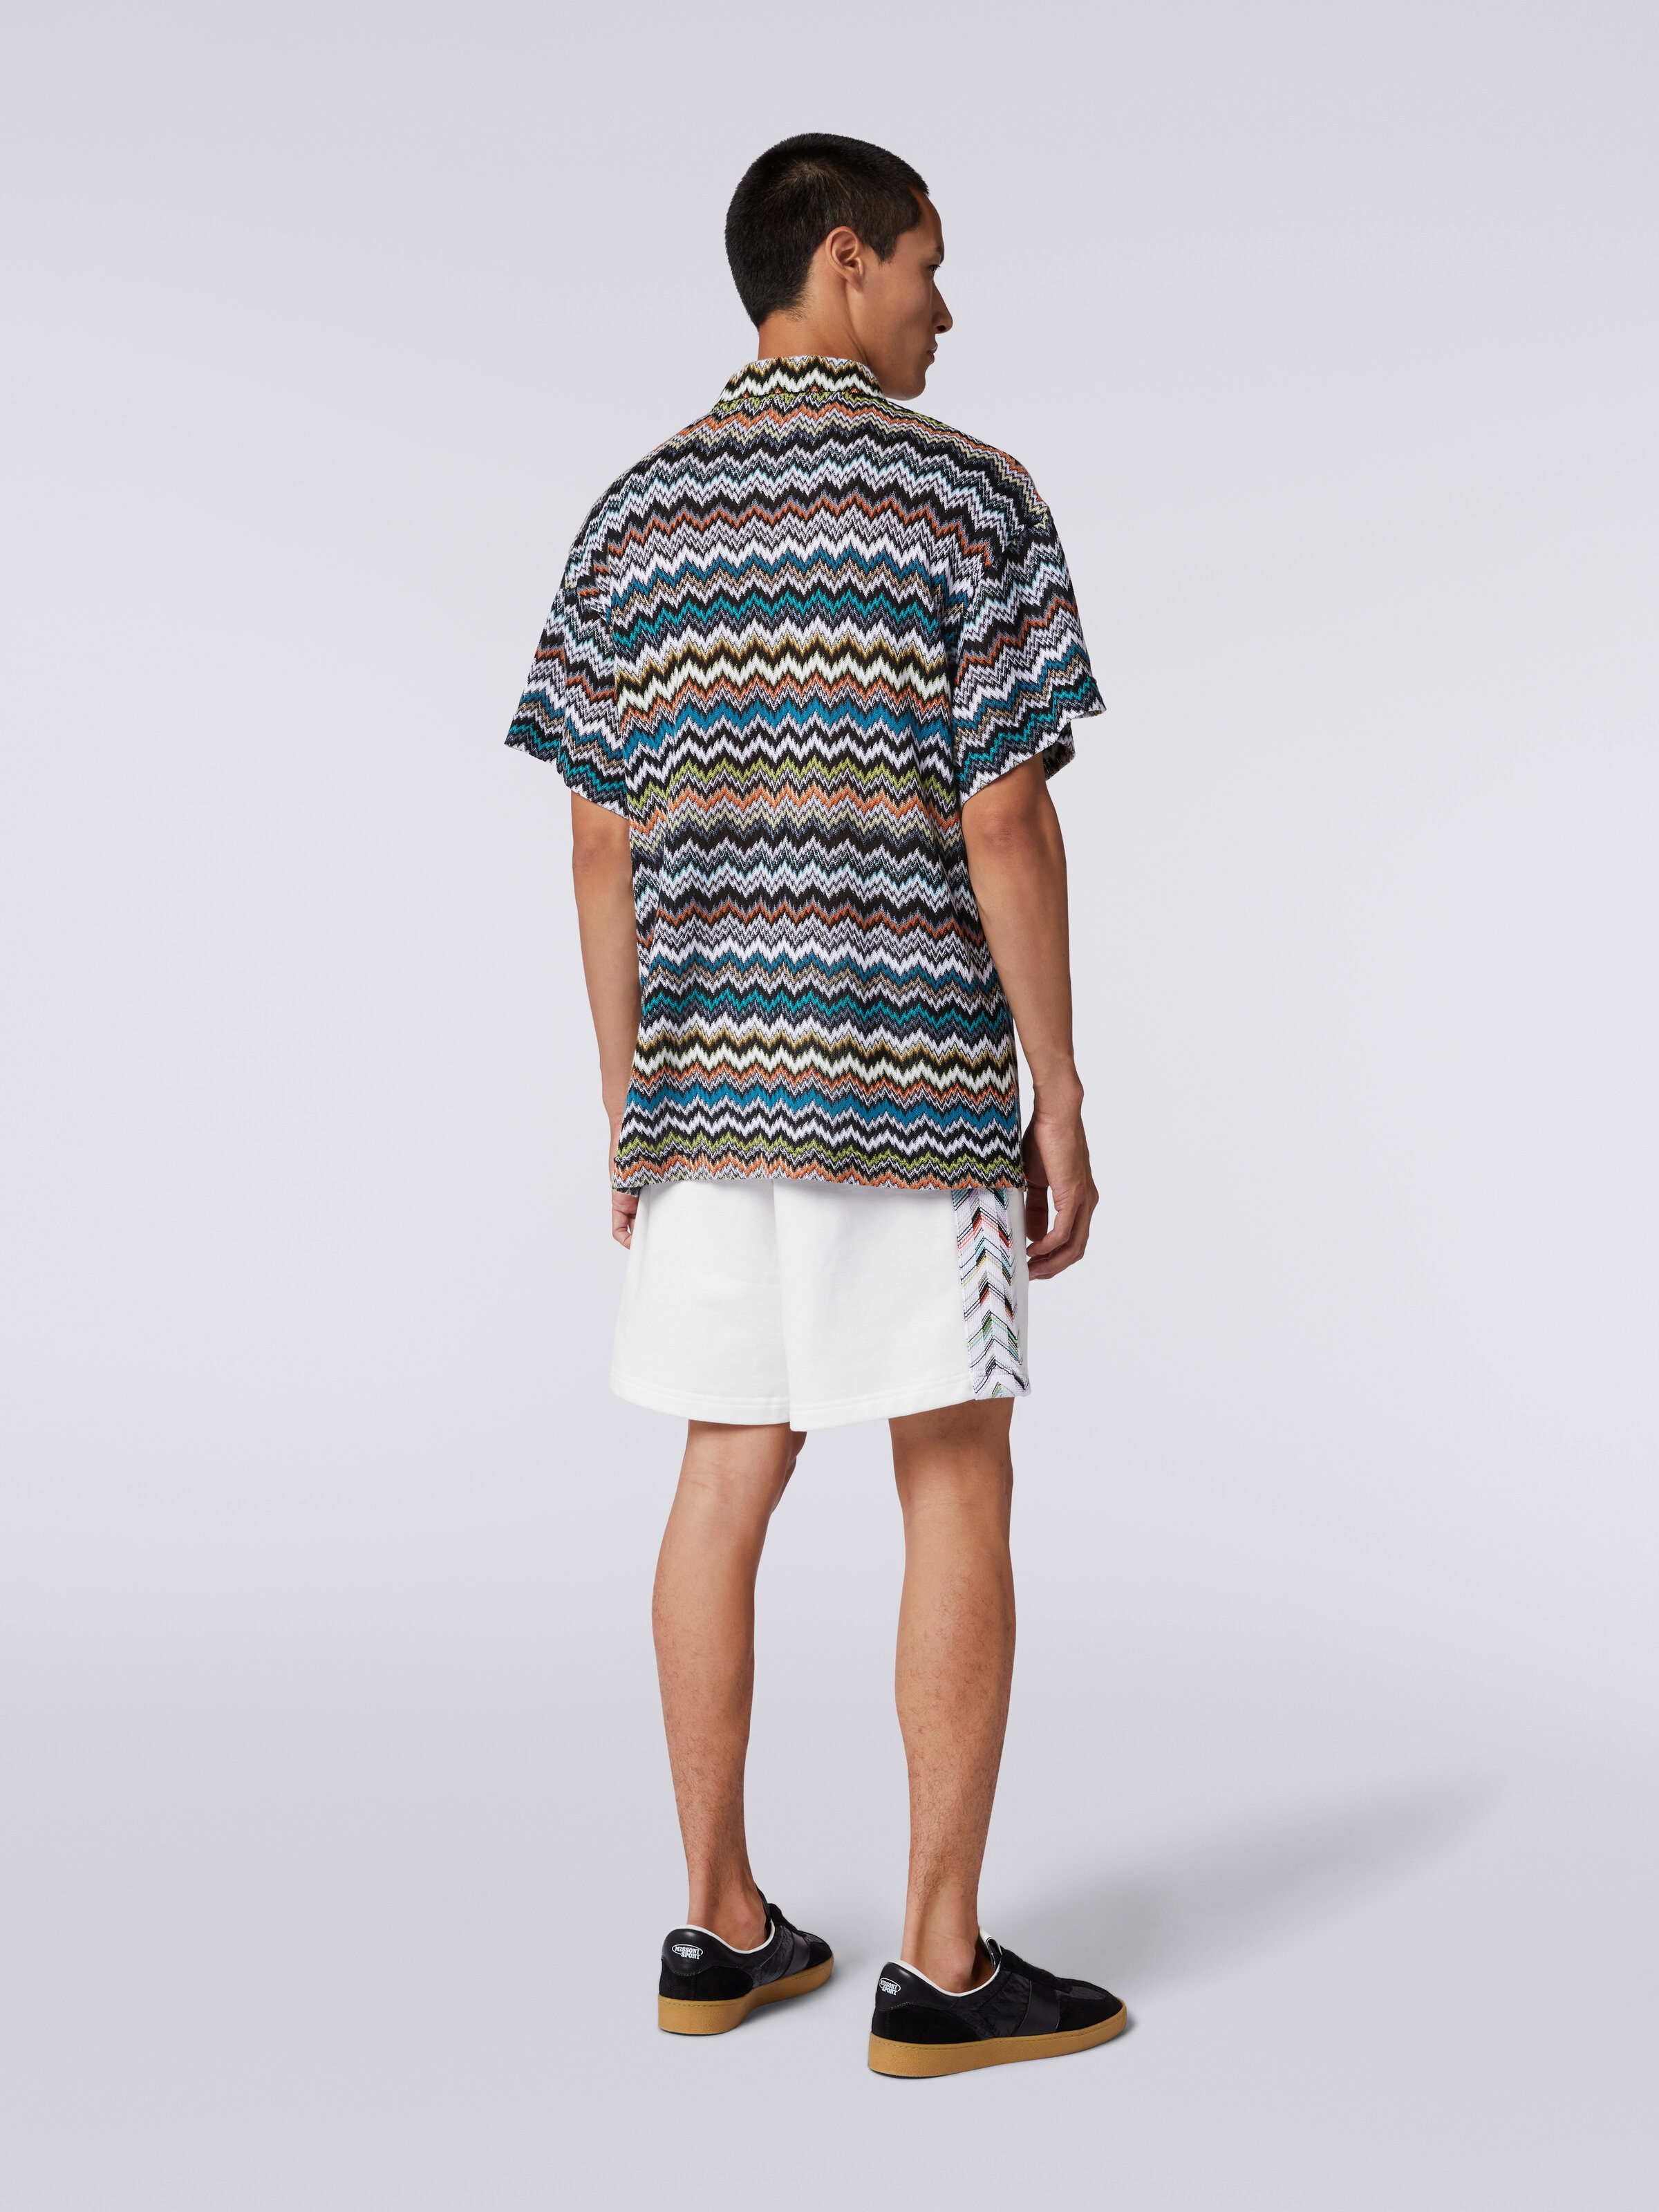 Polo shirt in zigzag cotton and viscose knit, Multicoloured  - 3